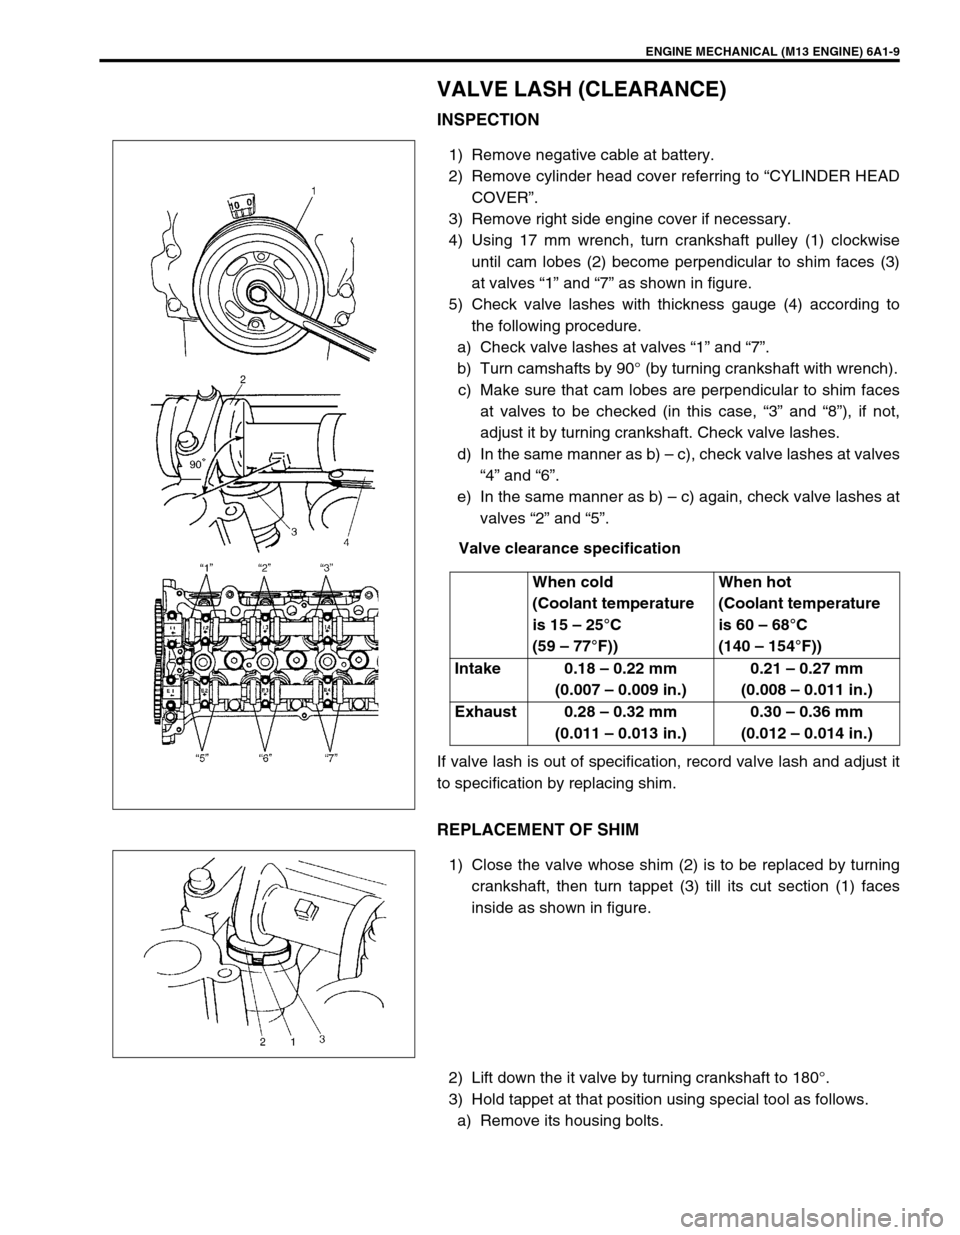 SUZUKI SWIFT 2000 1.G RG413 Service Owners Guide ENGINE MECHANICAL (M13 ENGINE) 6A1-9
VALVE LASH (CLEARANCE)
INSPECTION
1) Remove negative cable at battery.
2) Remove cylinder head cover referring to “CYLINDER HEAD
COVER”.
3) Remove right side e